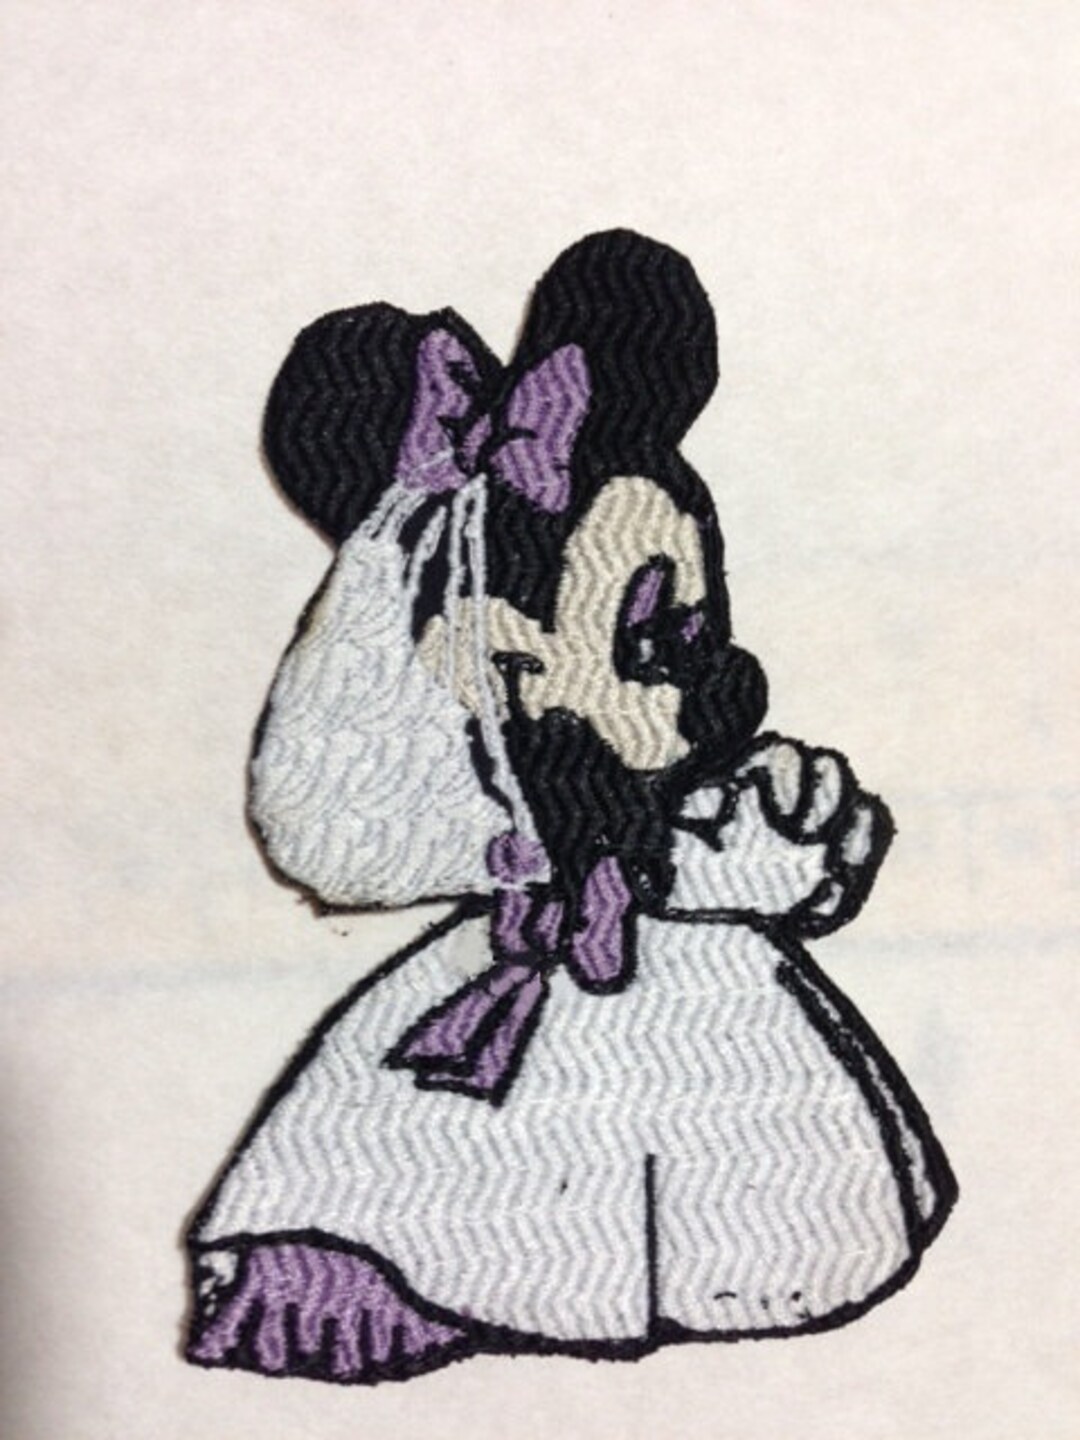 Minnie Mouse Inspired Iron on Patch, Large Minnie Mouse Inspired